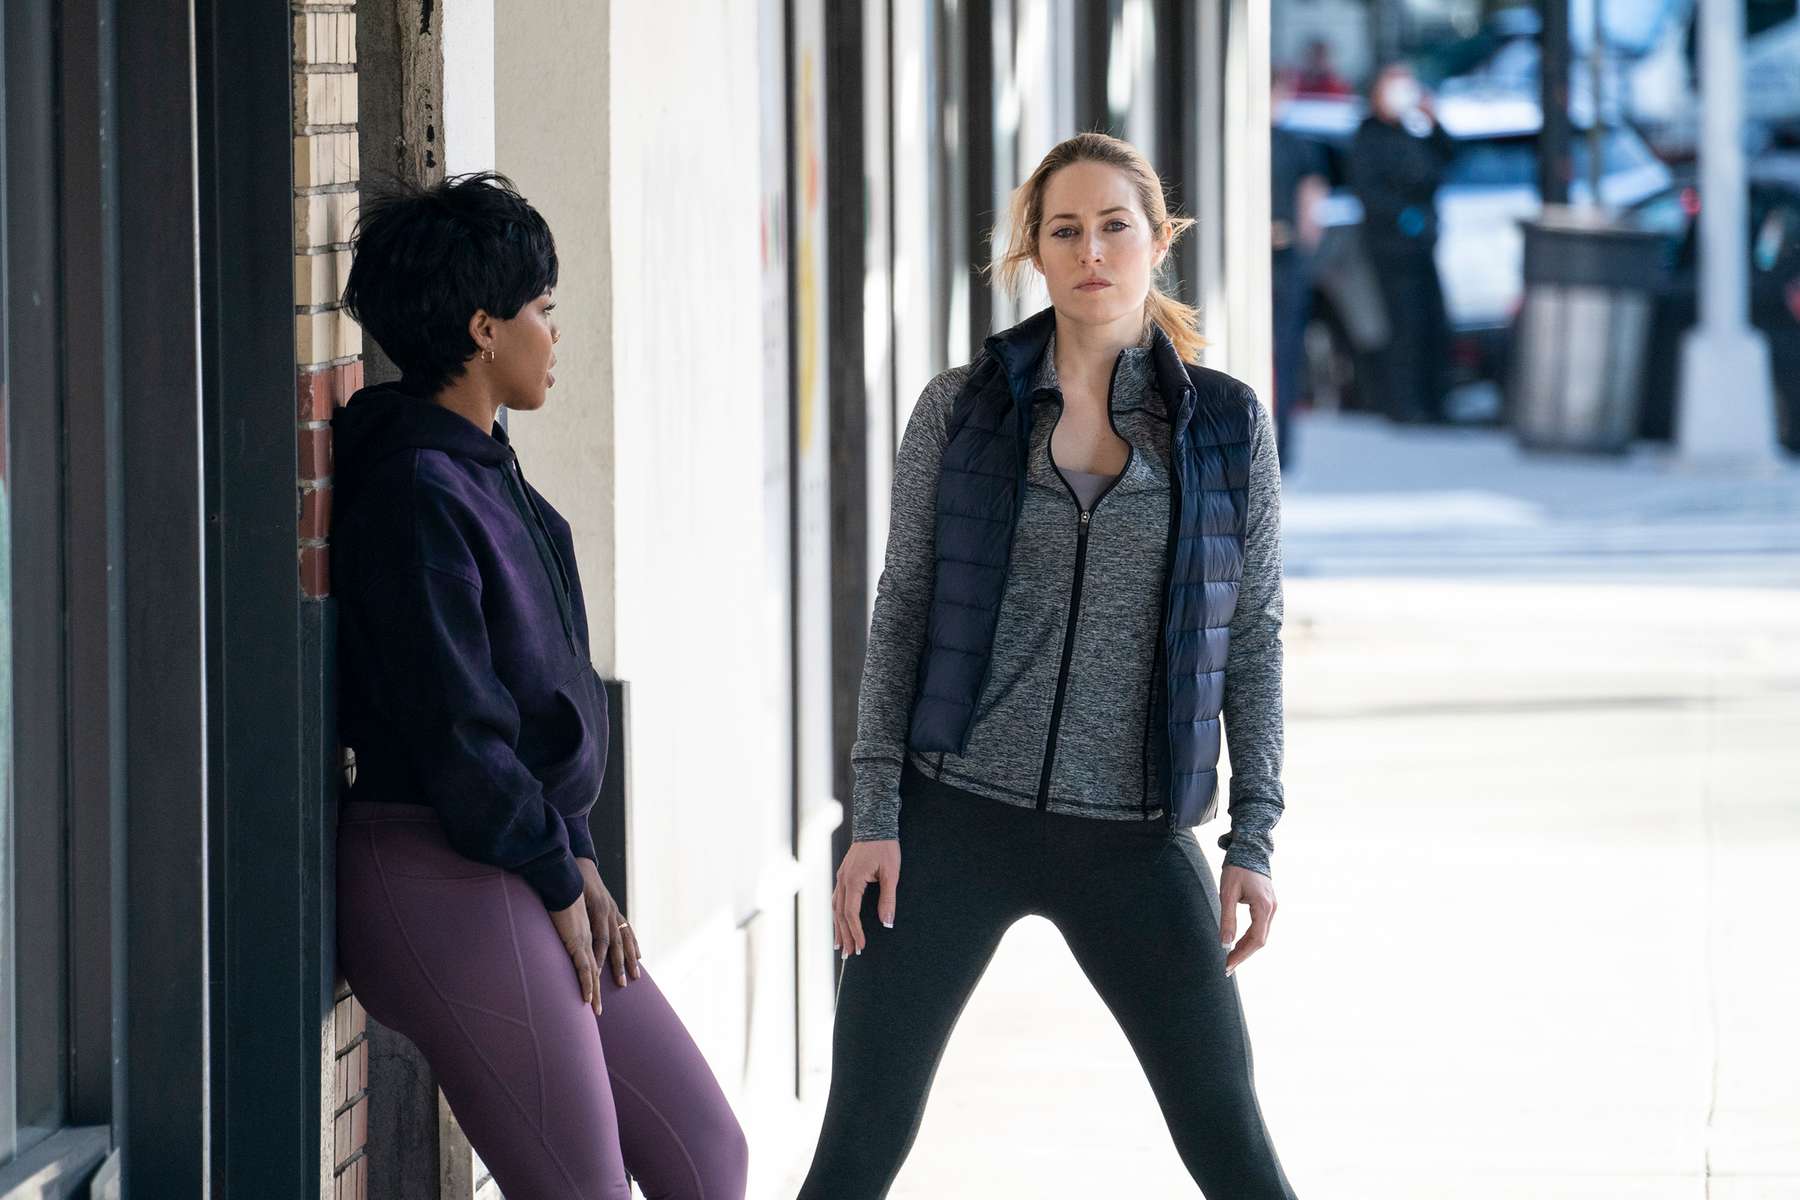 LAW & ORDER: ORGANIZED CRIME -- {quote}Say Hello To My Little Friend{quote} Episode 103 -- Pictured: (l-r) Danielle Moné Truitt as Sergeant Ayanna Bell, Charlotte Sullivan as Gina Cappelletti -- (Photo by: Heidi Gutman/NBC)